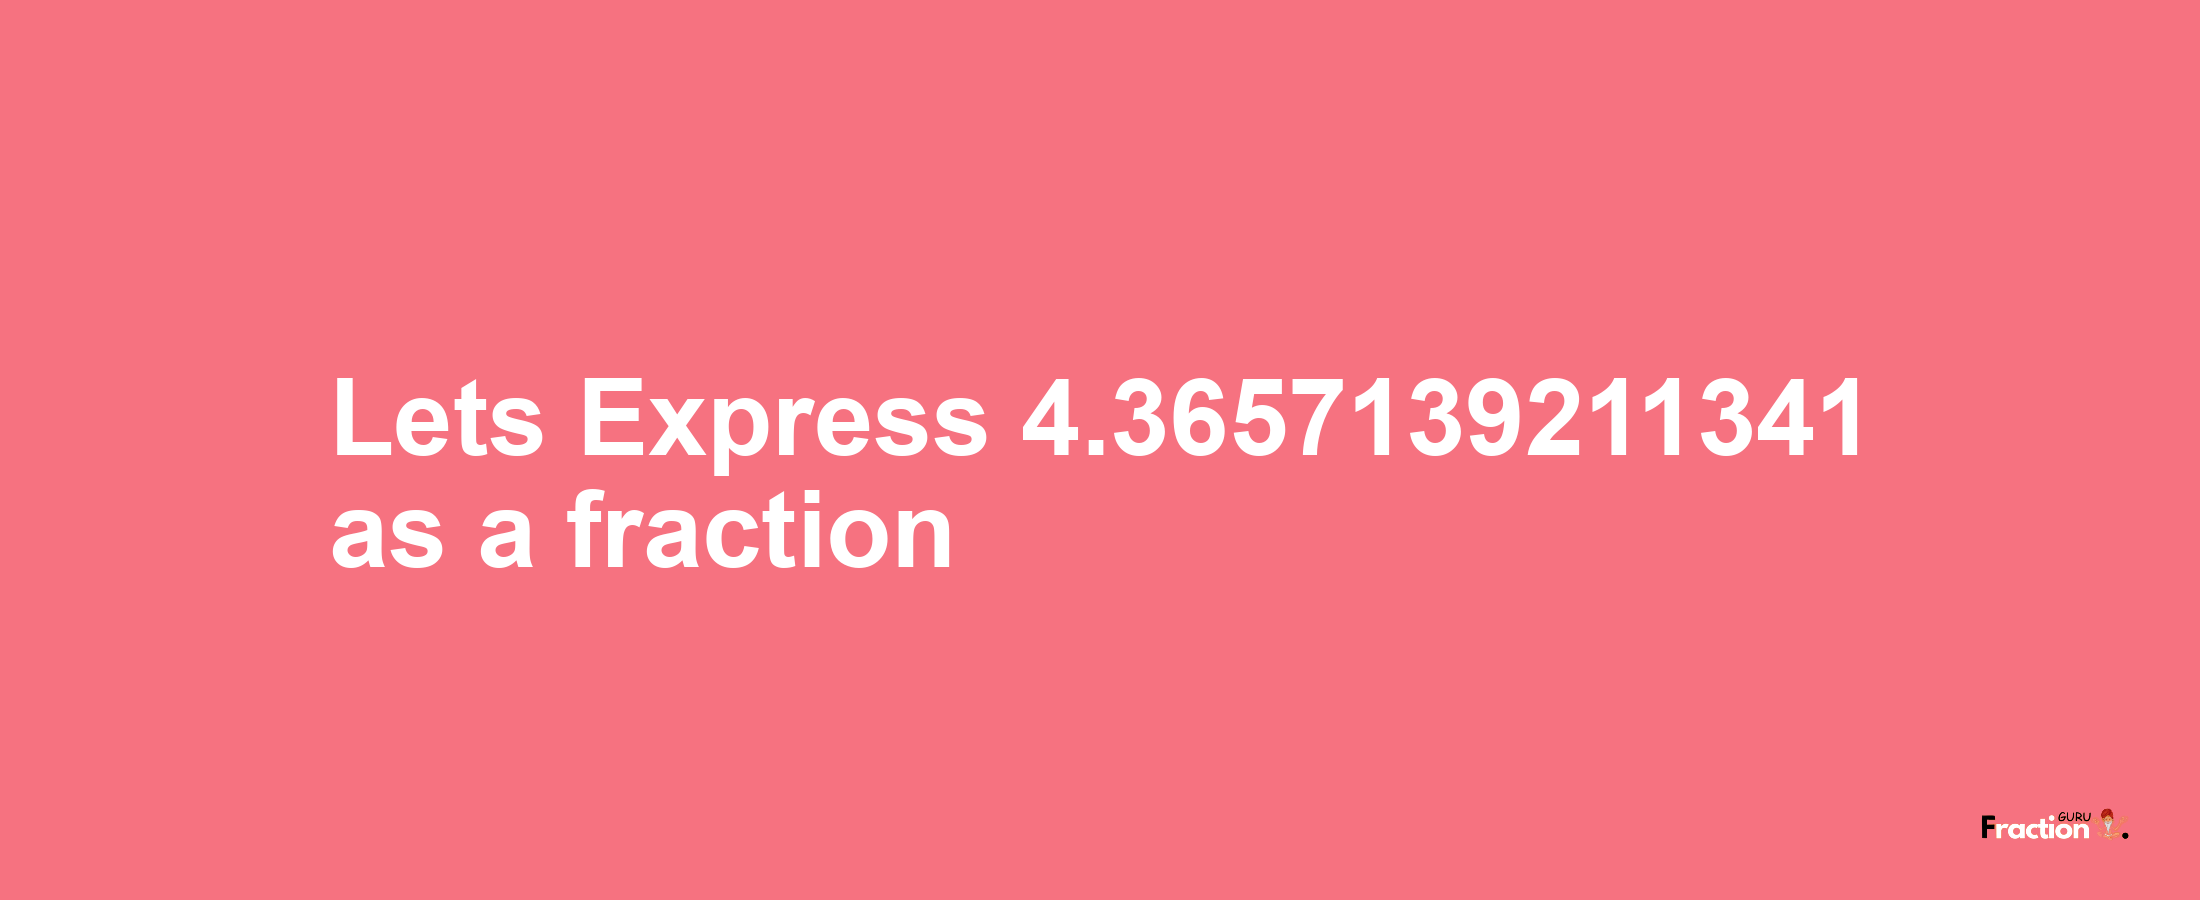 Lets Express 4.3657139211341 as afraction